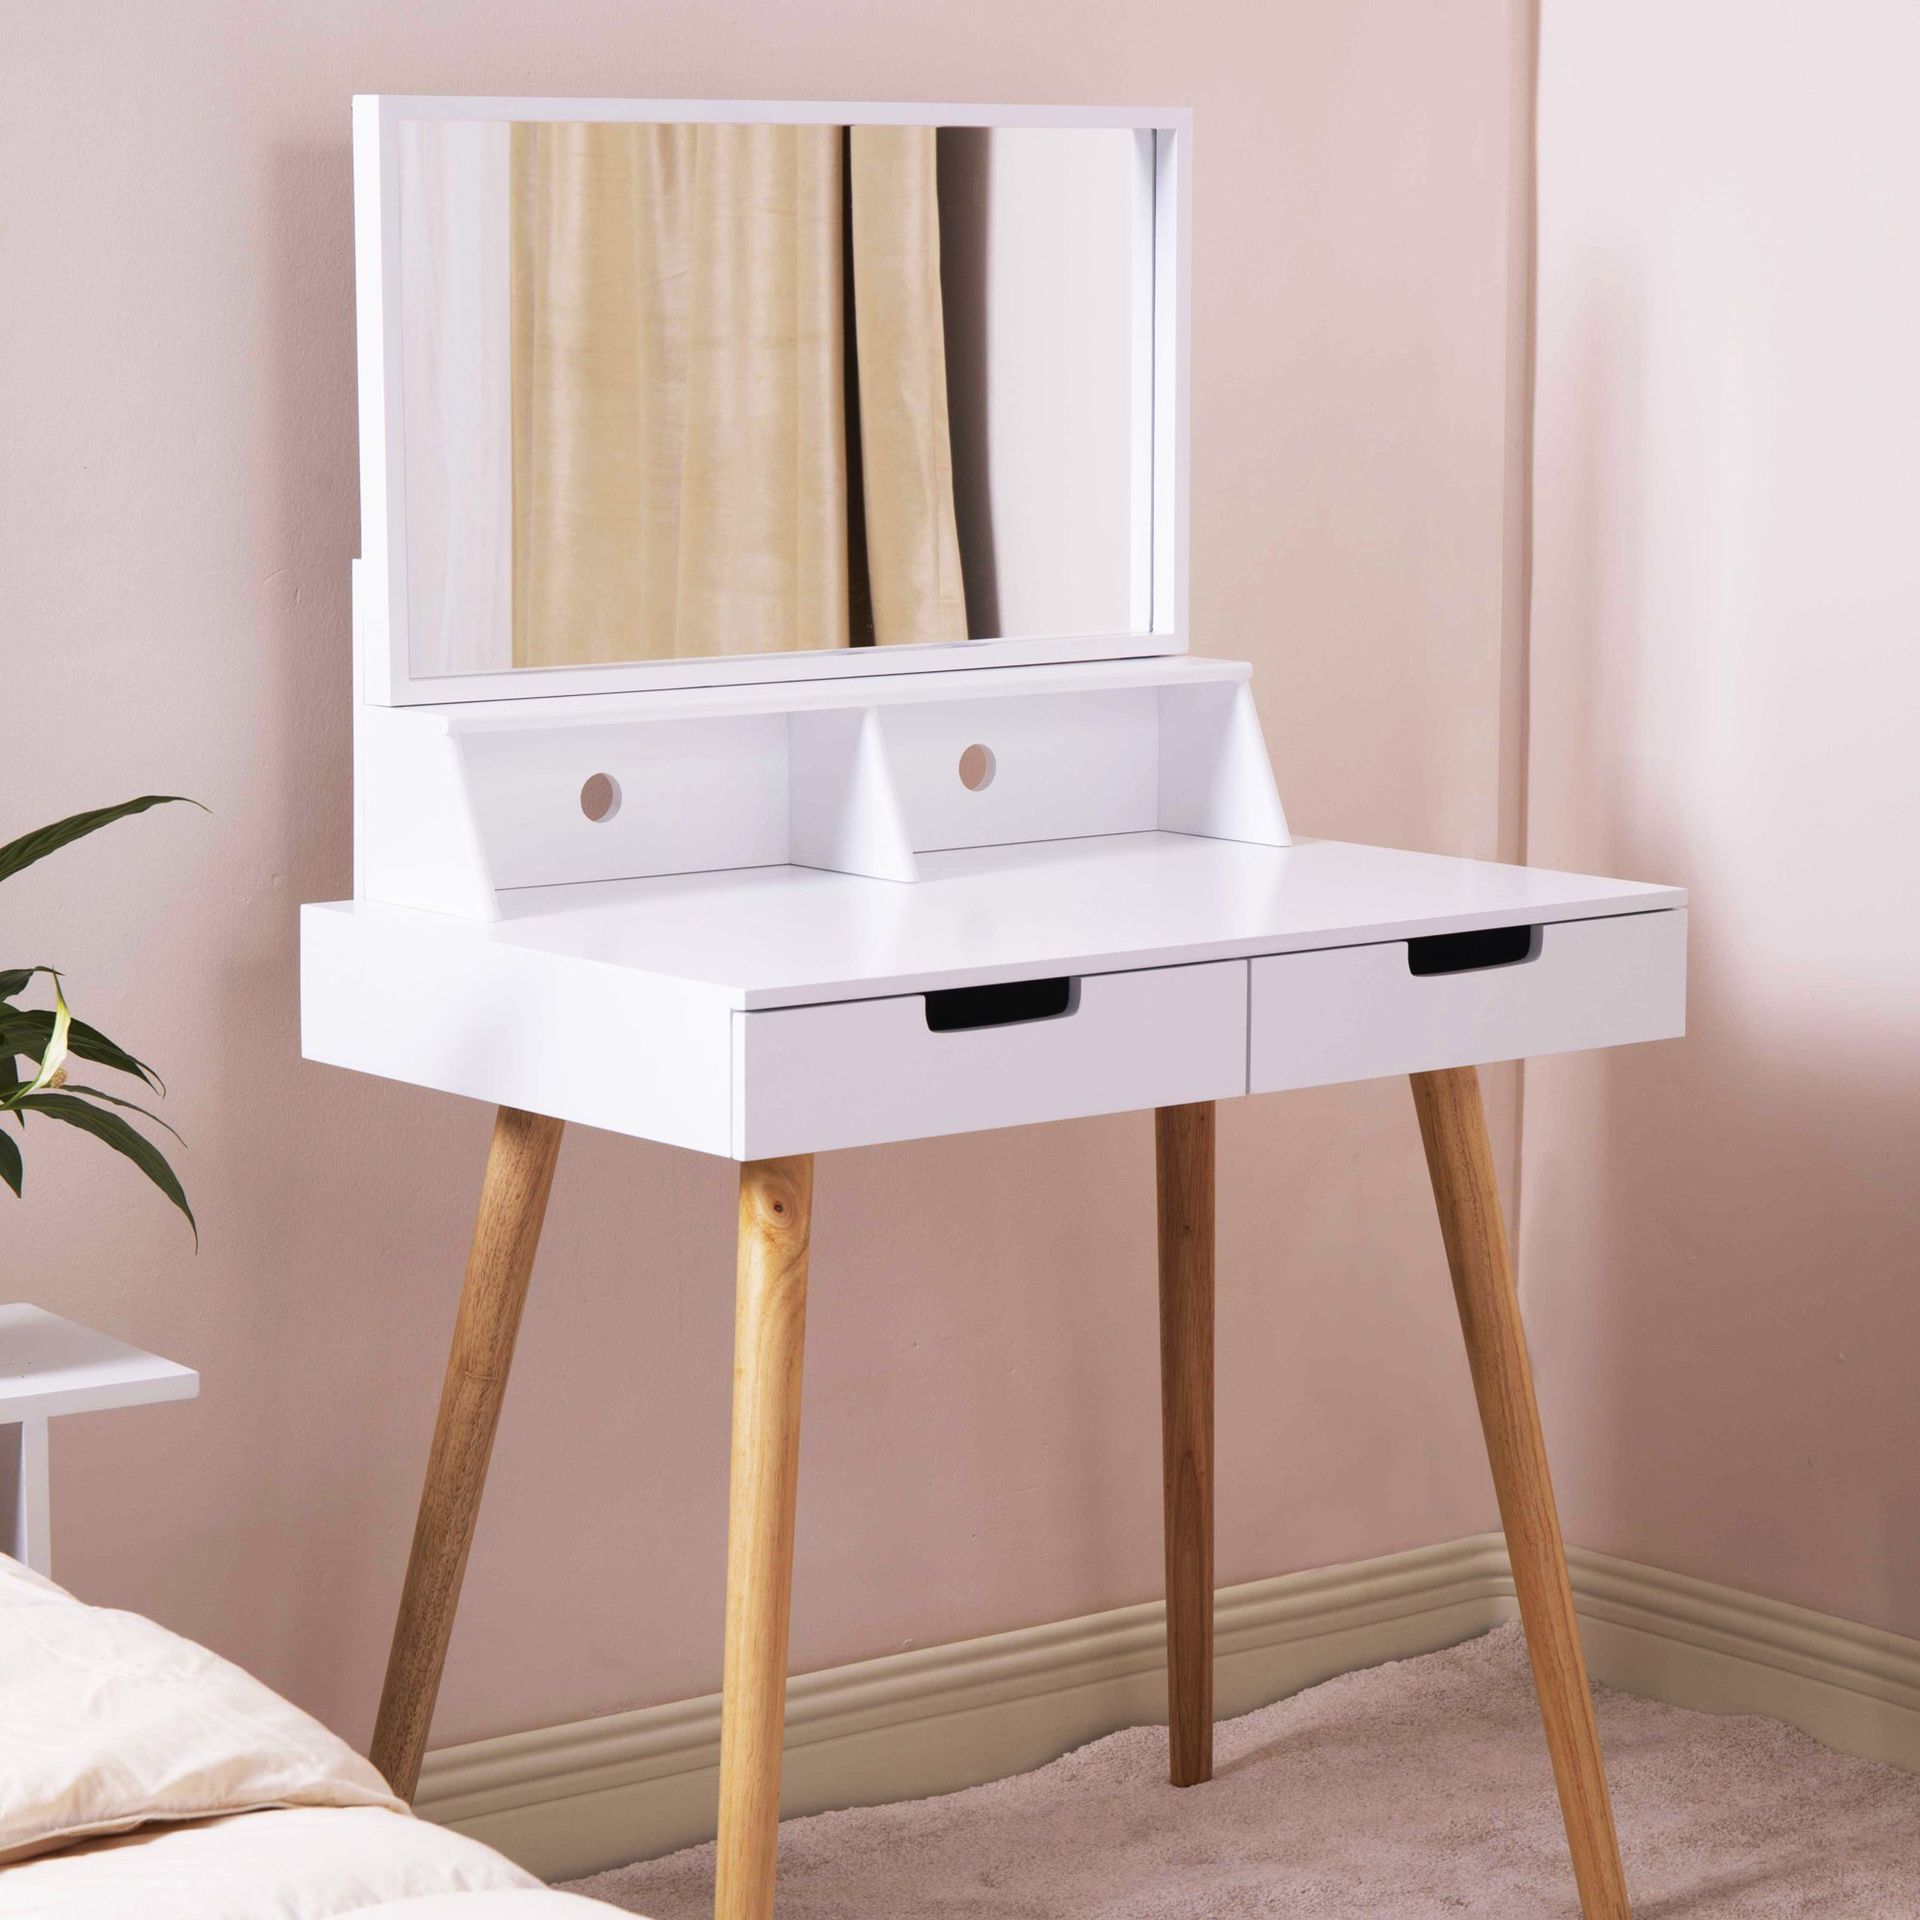 Organizedlife Vanity Dressing Table Dressing Mirror with 2 Makeups Drawers,White